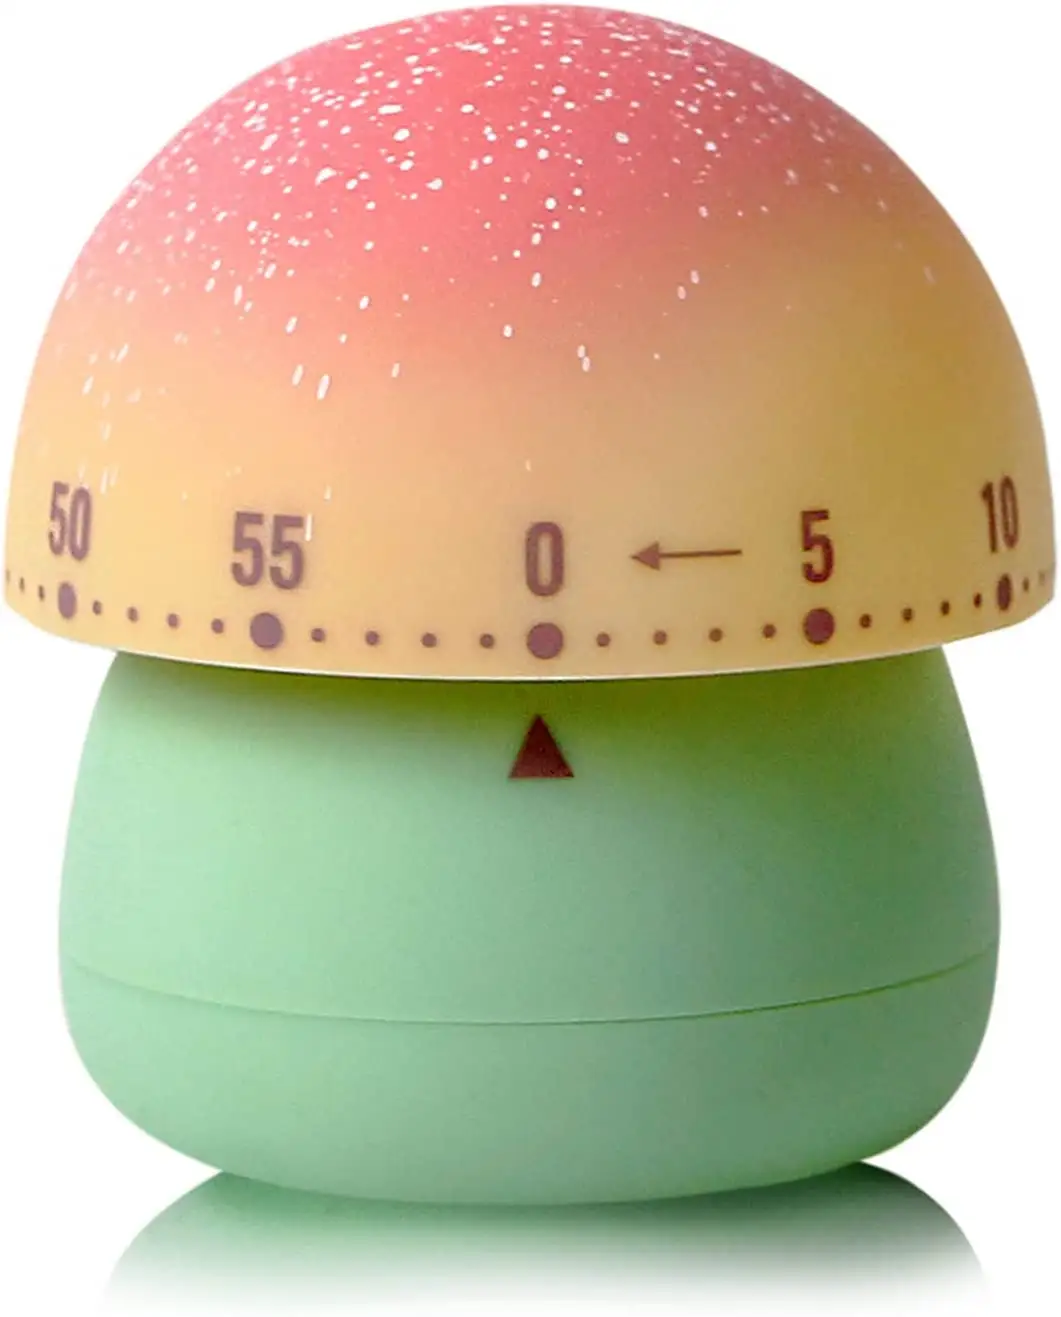 Mechanical Kitchen Timer Cute Mushroom Timer for Kids Wind Up 60 Minutes Manual Countdown Timer for Classroom, Home